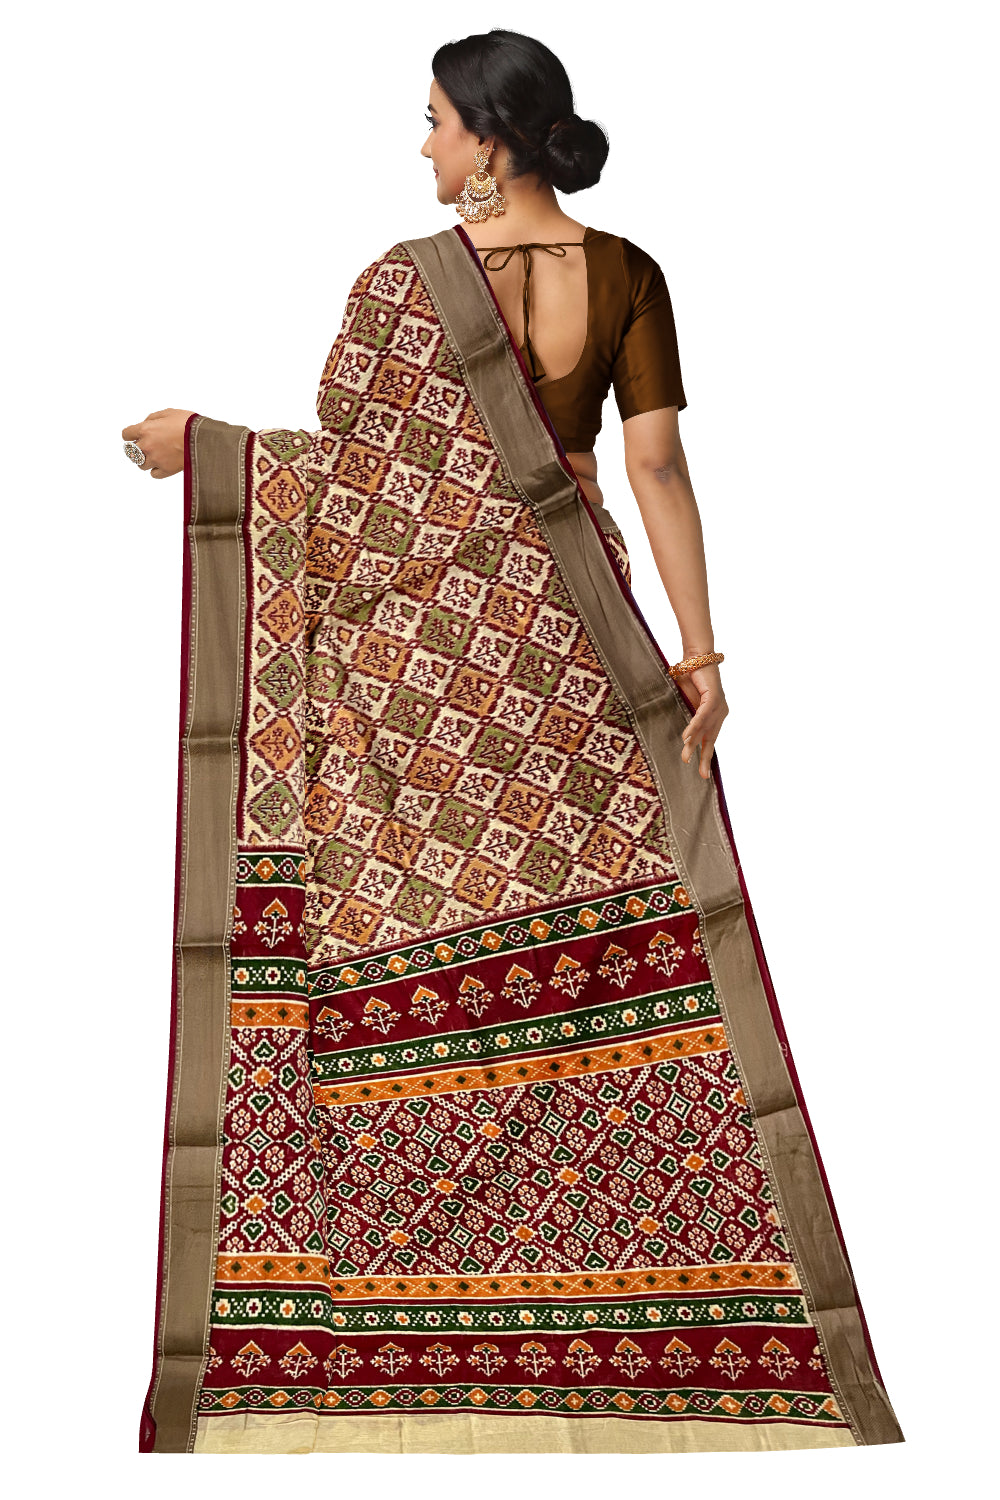 Southloom Maroon Beige Cotton Saree with Woven Patterns on Body